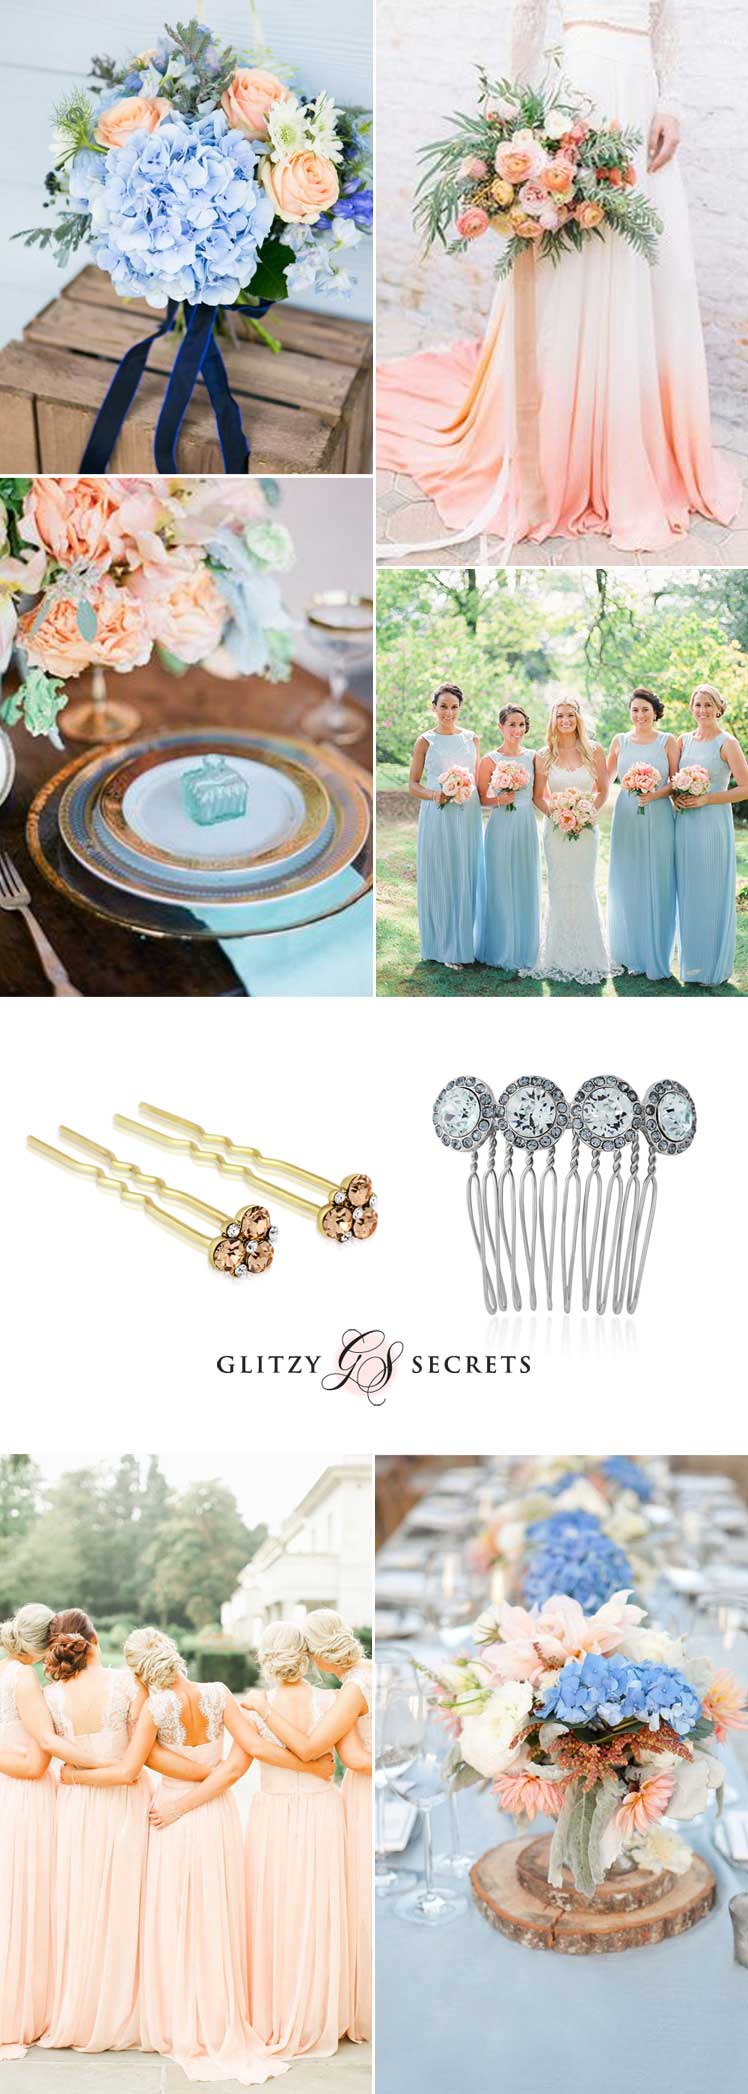 Ideas for a pastel pale blue and peach wedding theme